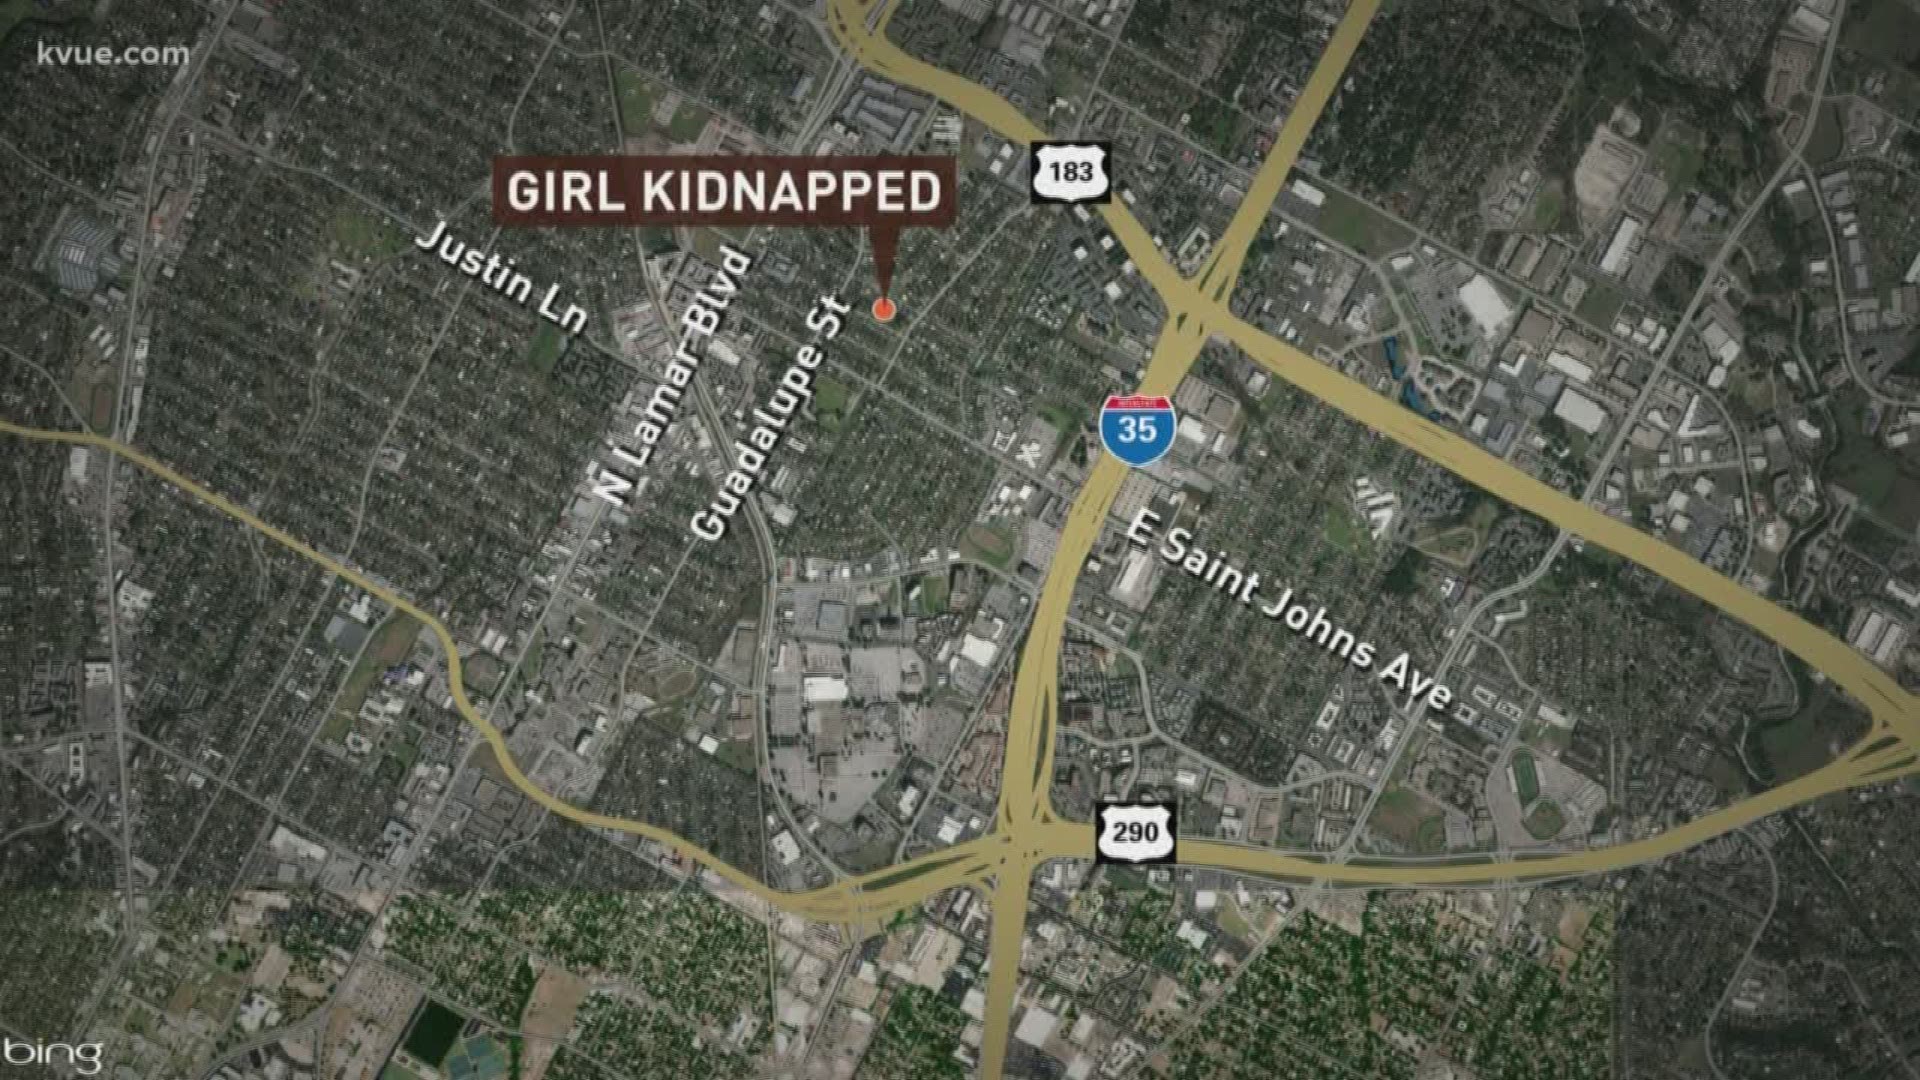 A man is charged with kidnapping after trying to steal a car with a five-year-old girl inside.